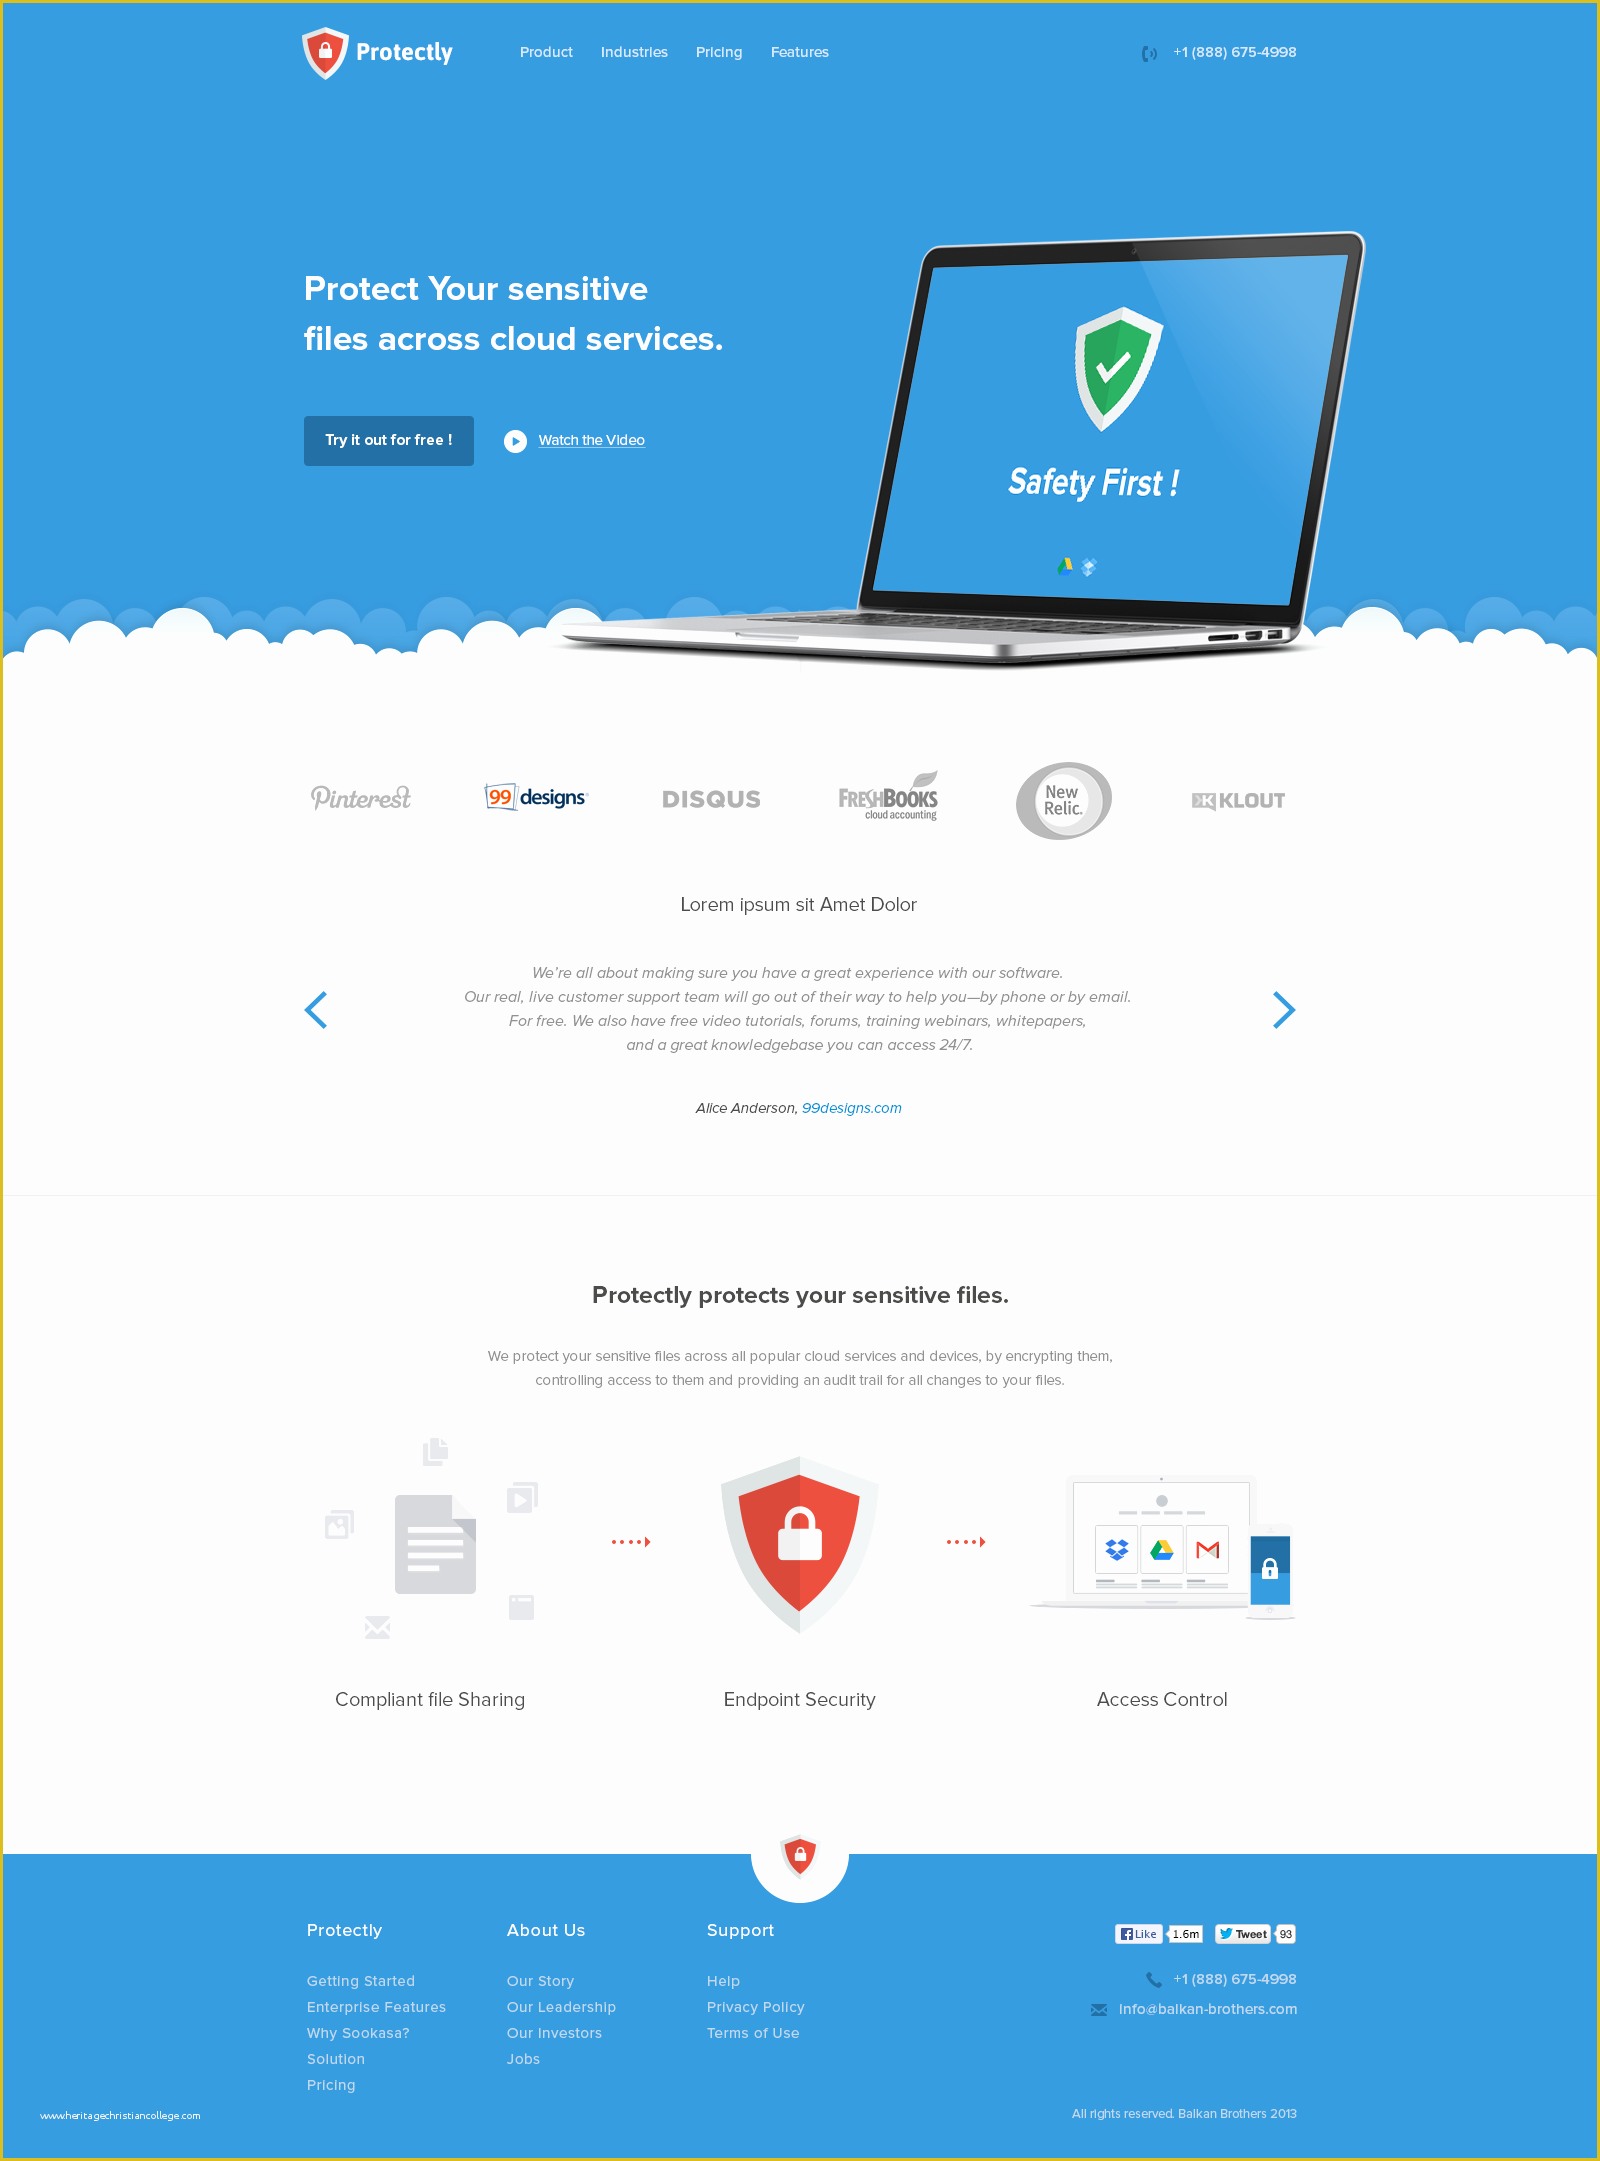 Psd Website Templates Free Download 2017 Of Protectly Website Psd Freebie 72pxdesigns